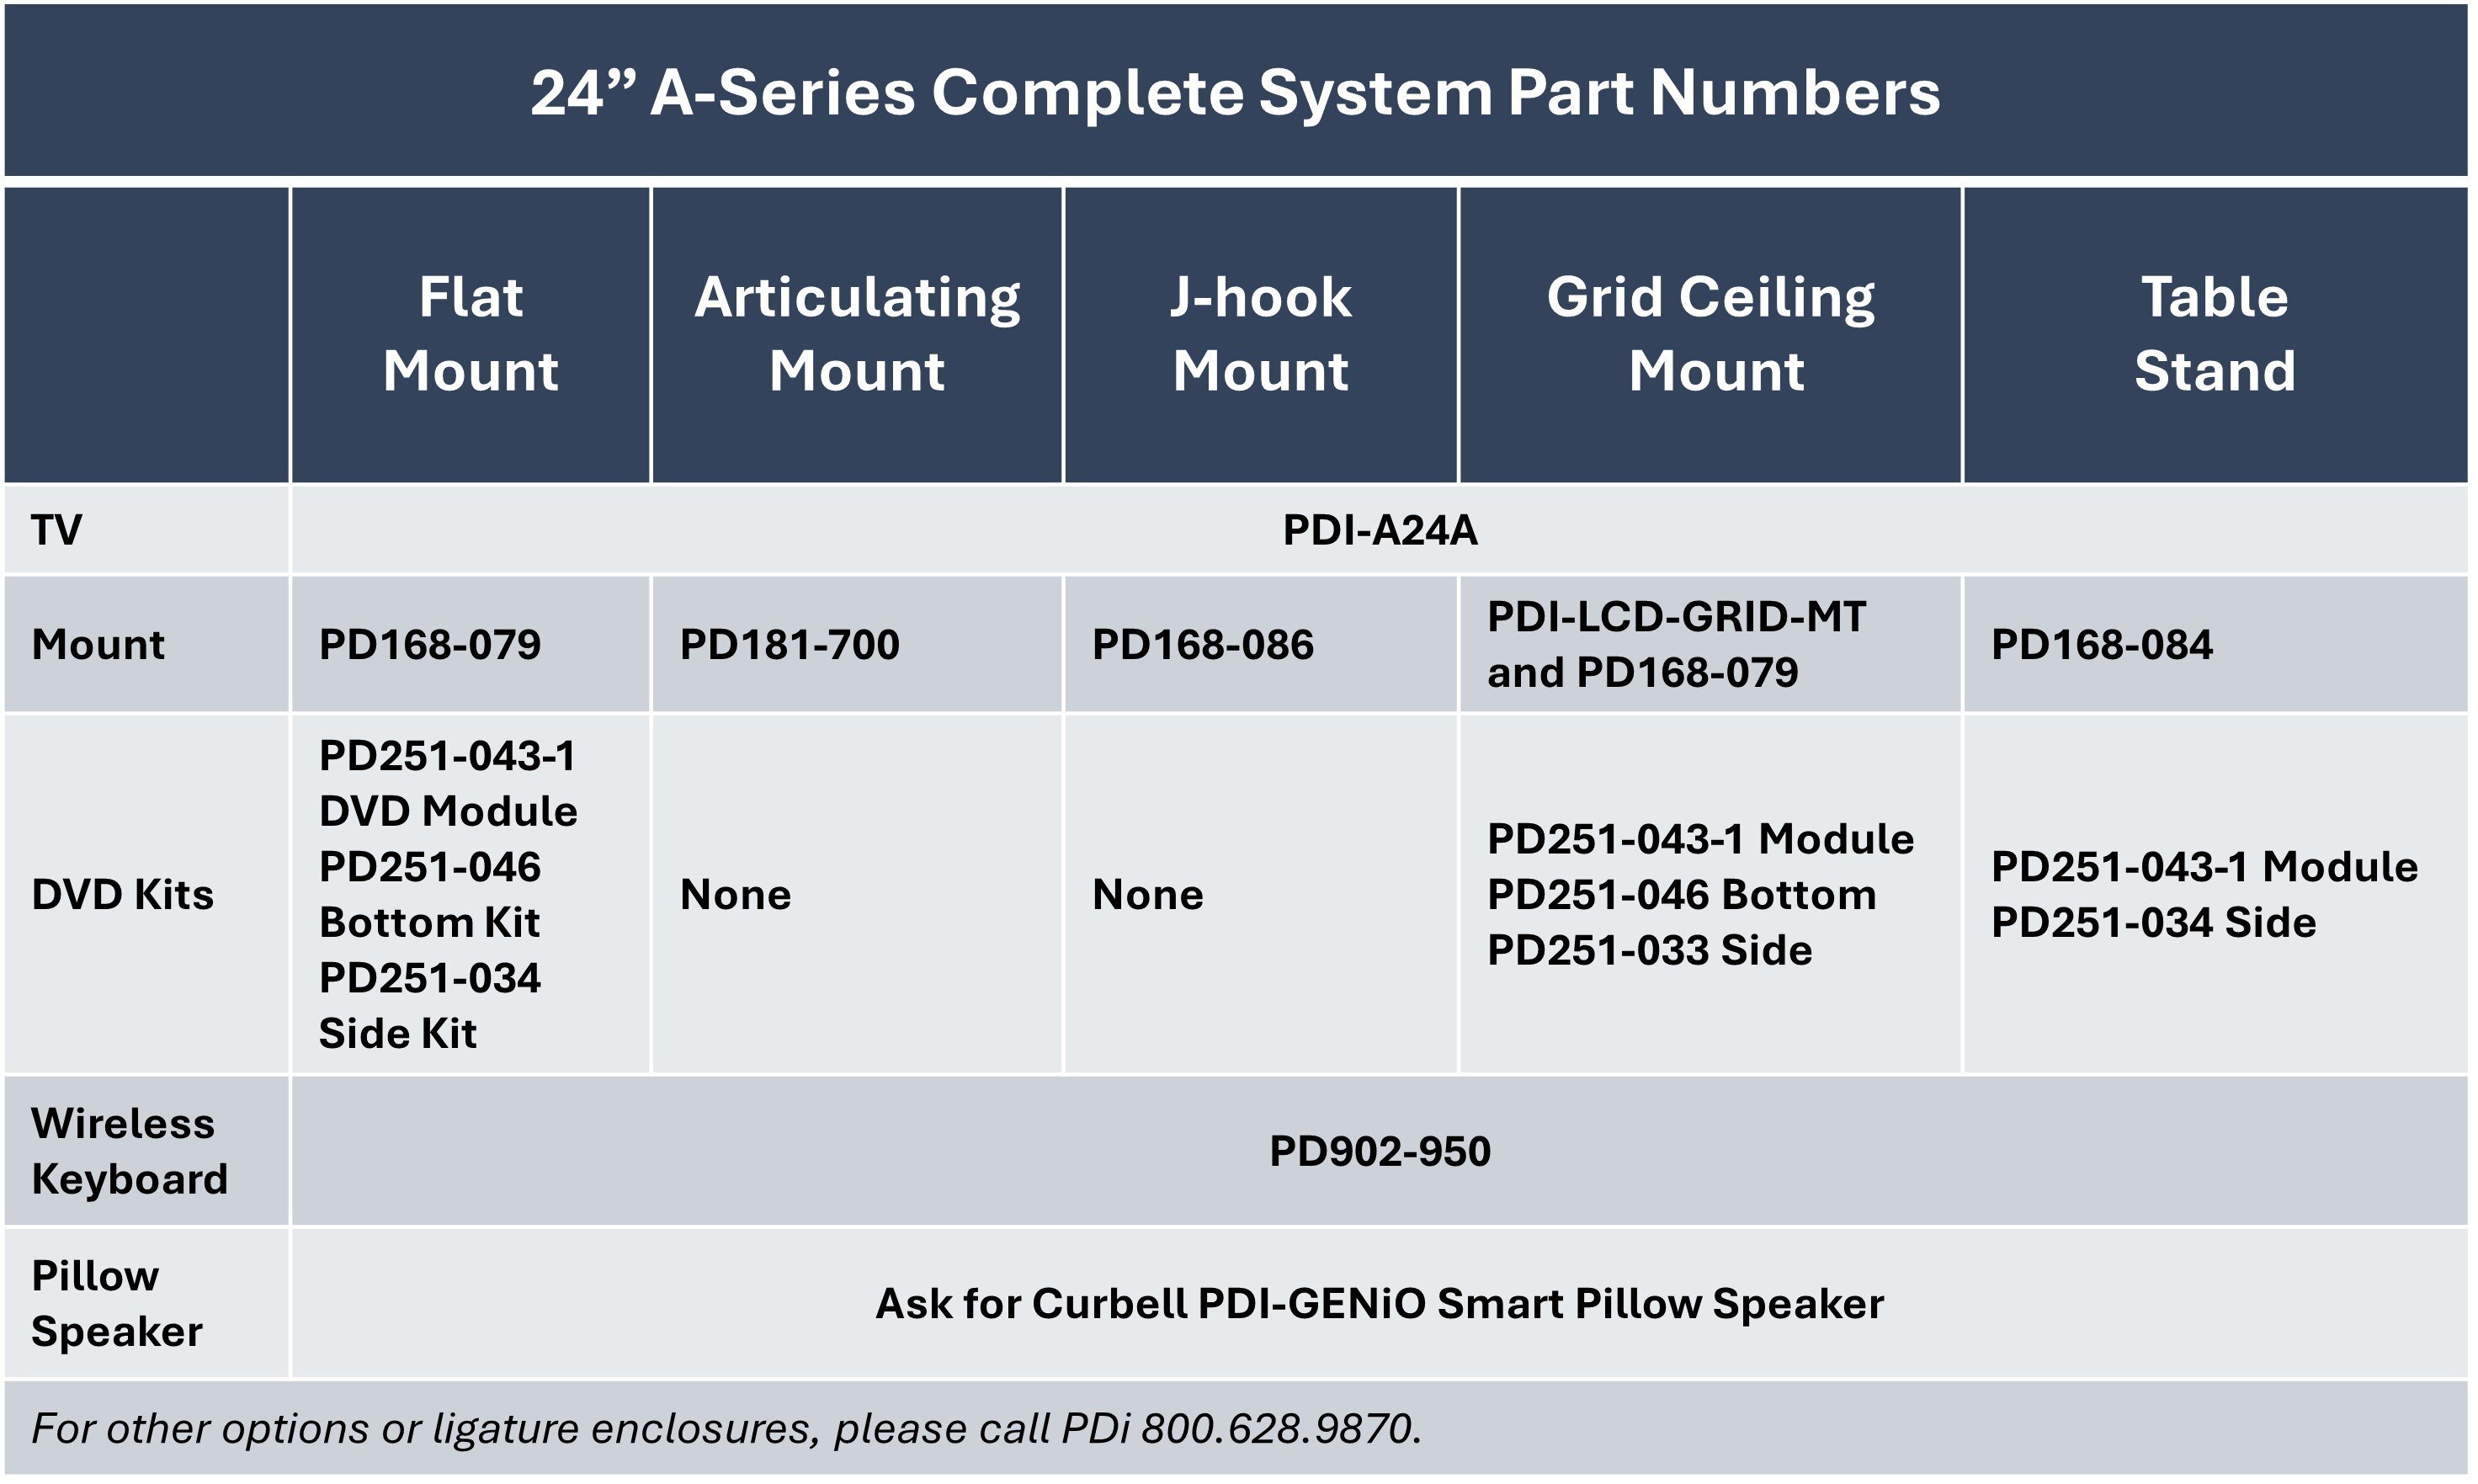 PDi Part Numbers for Complete 24